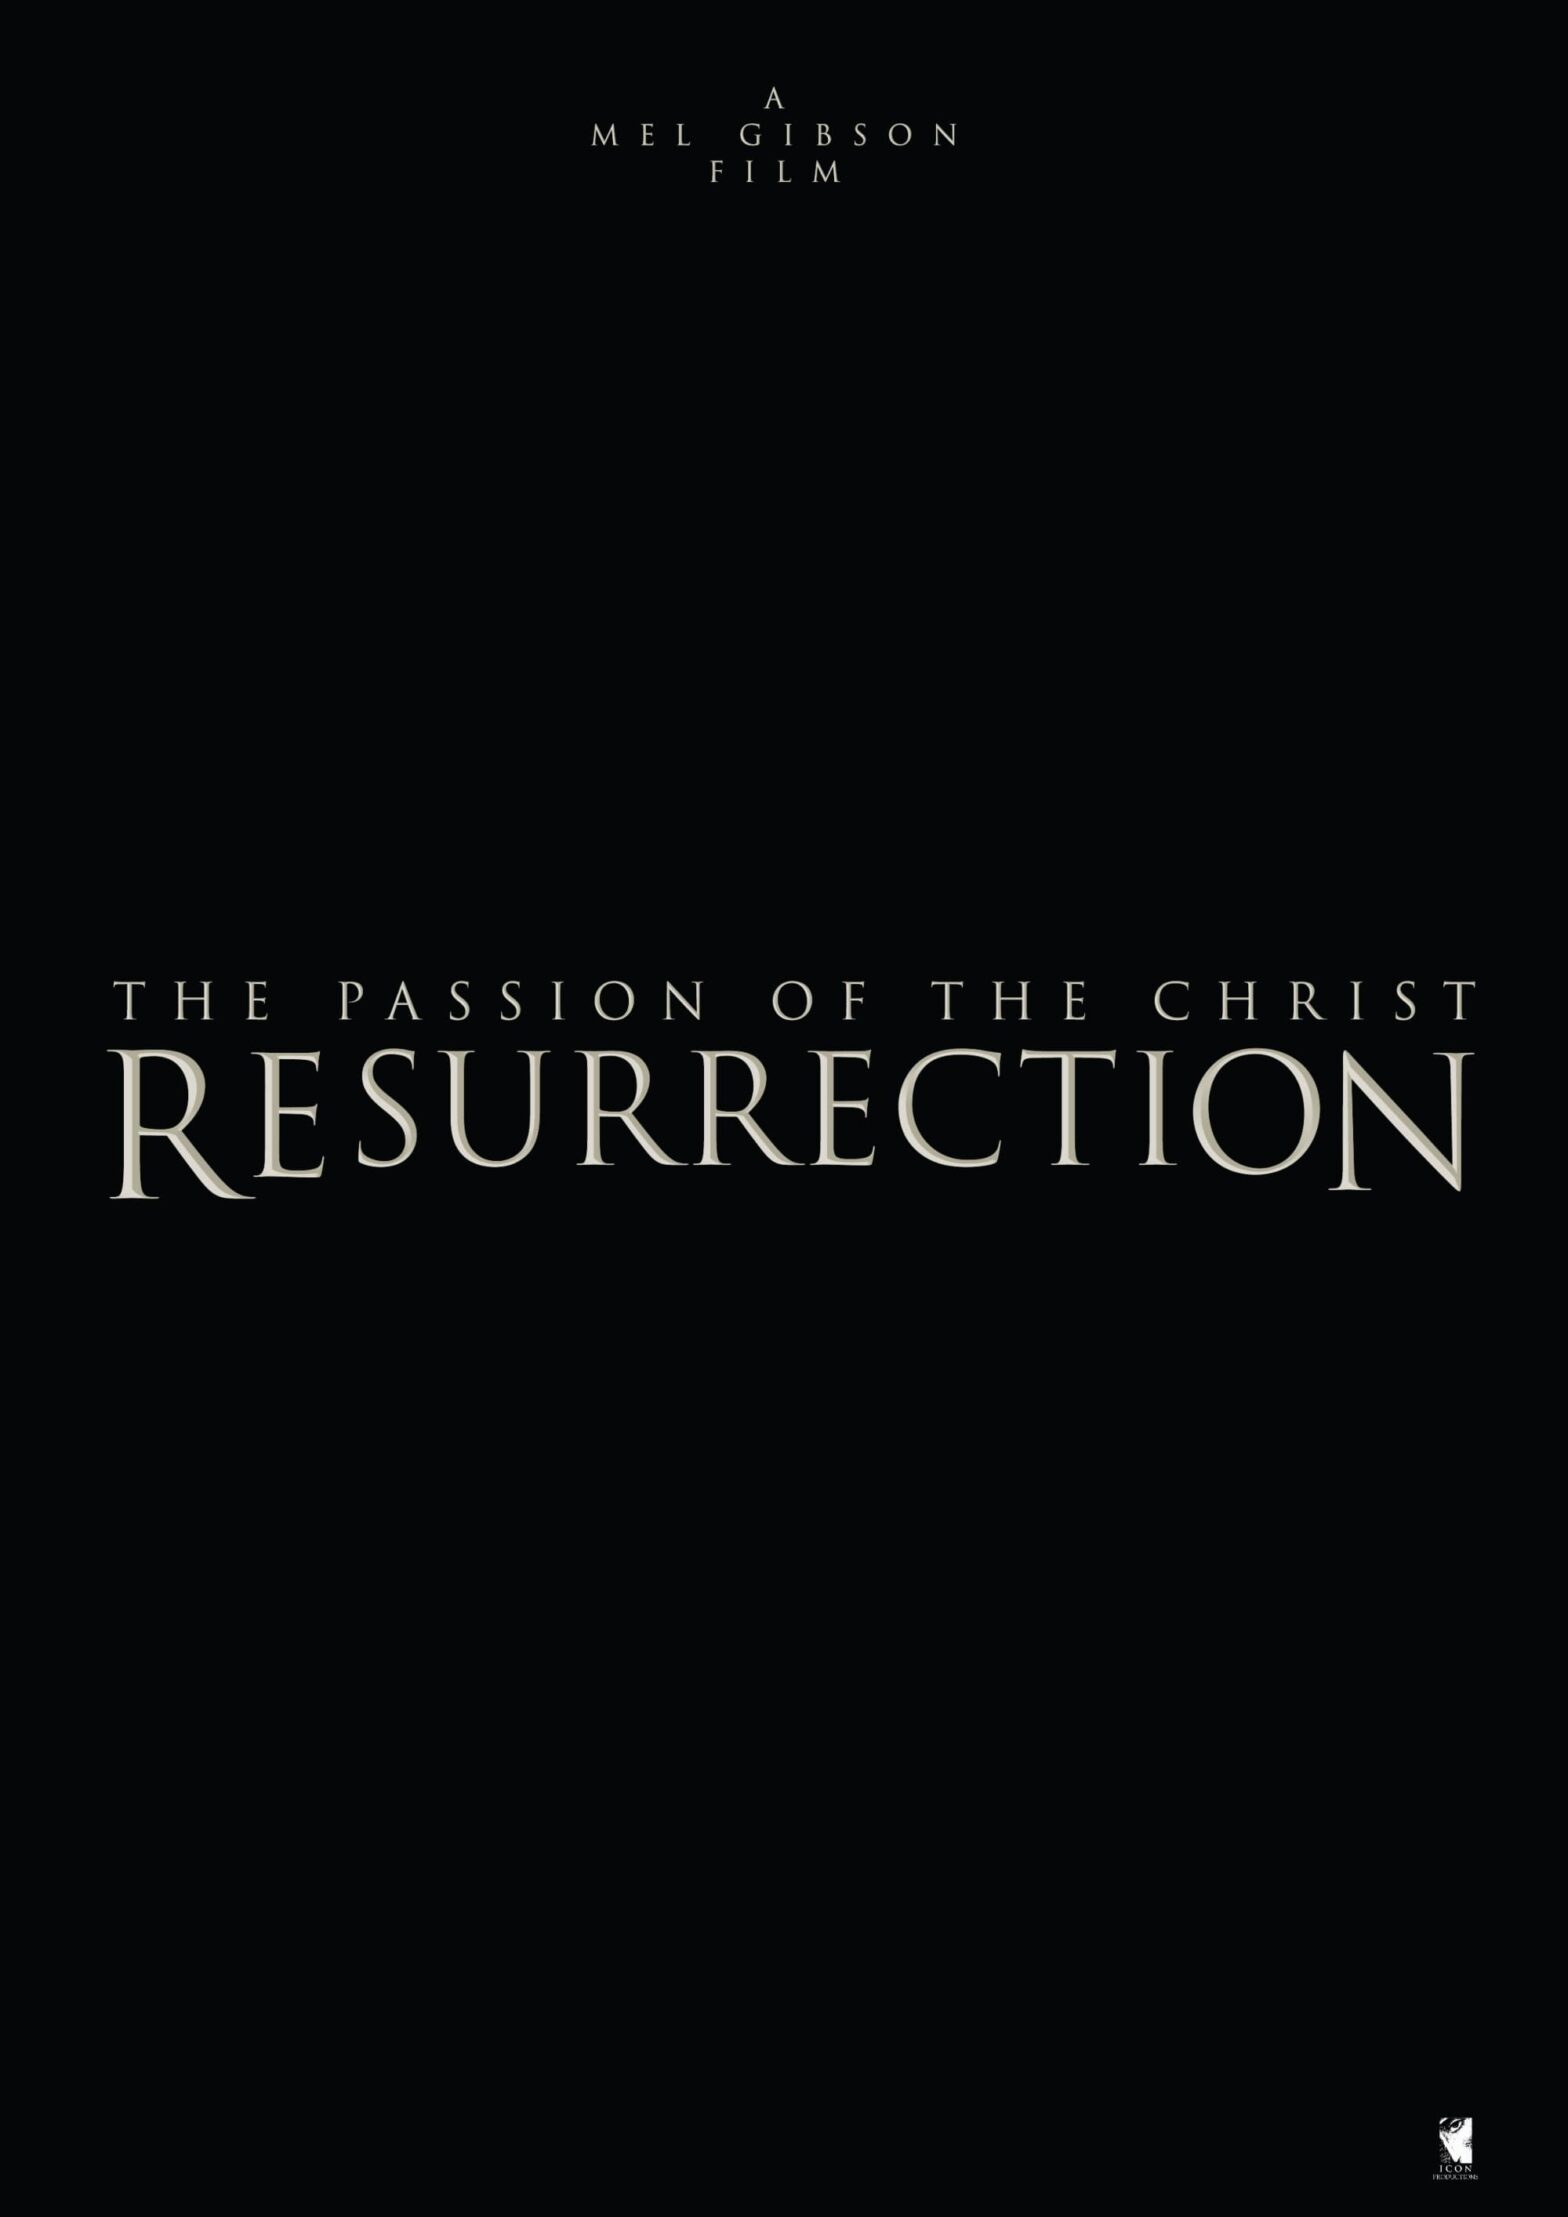 Poster for the movie "The Passion of the Christ: Resurrection"